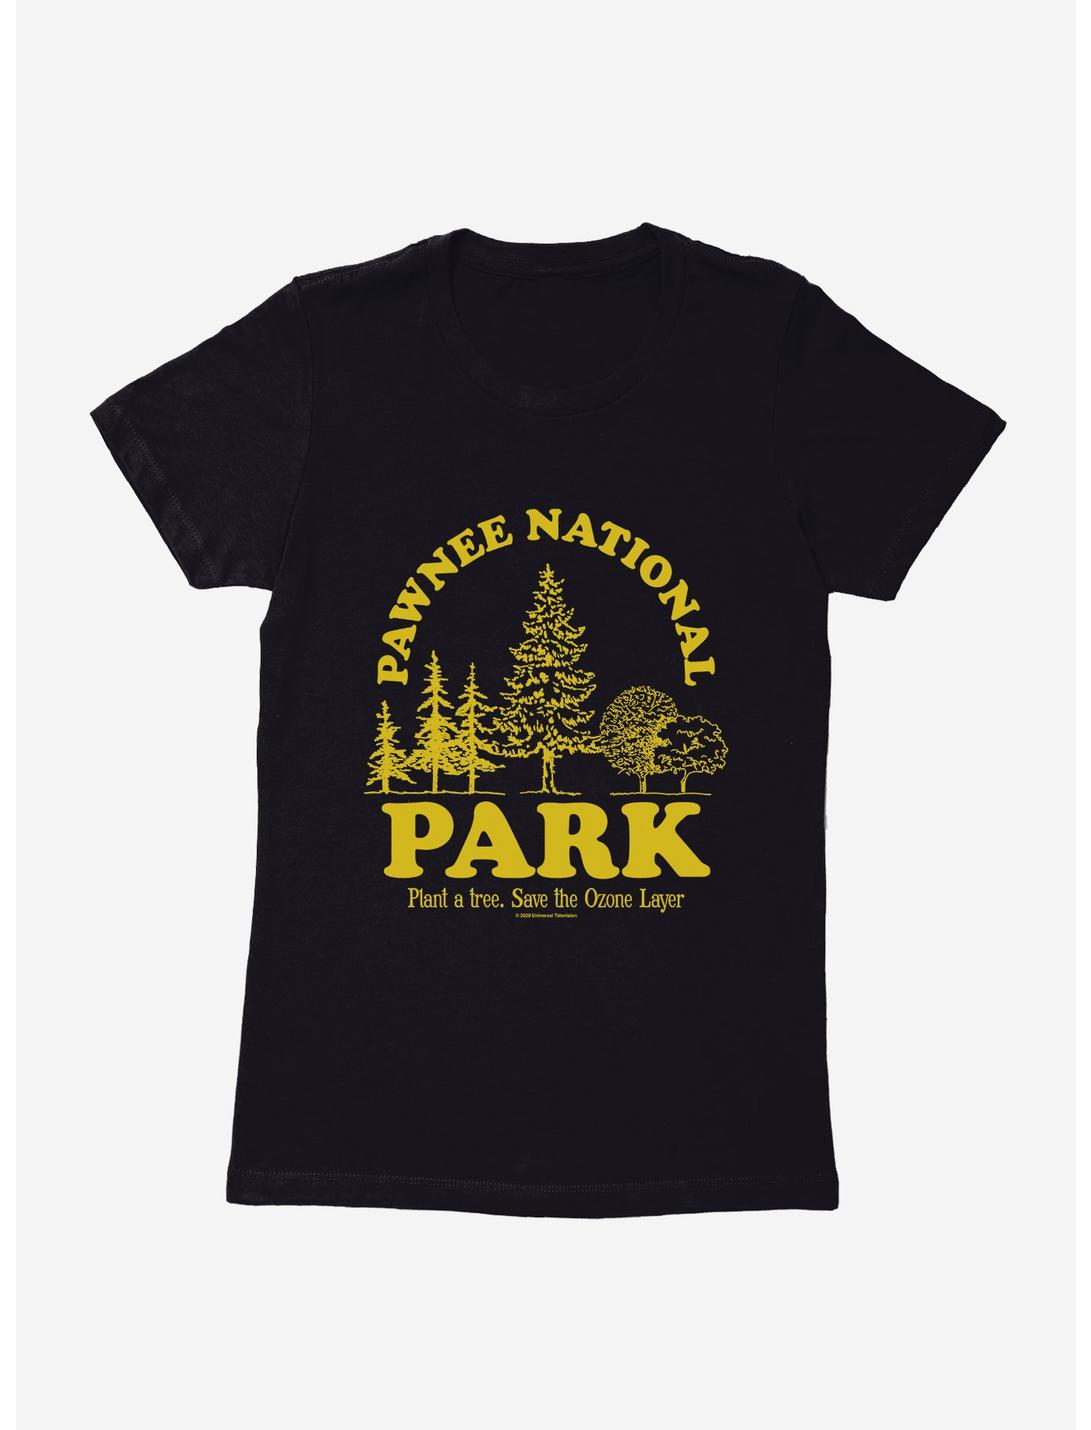 Parks And Recreation Pawnee National Park Womens T-Shirt, , hi-res